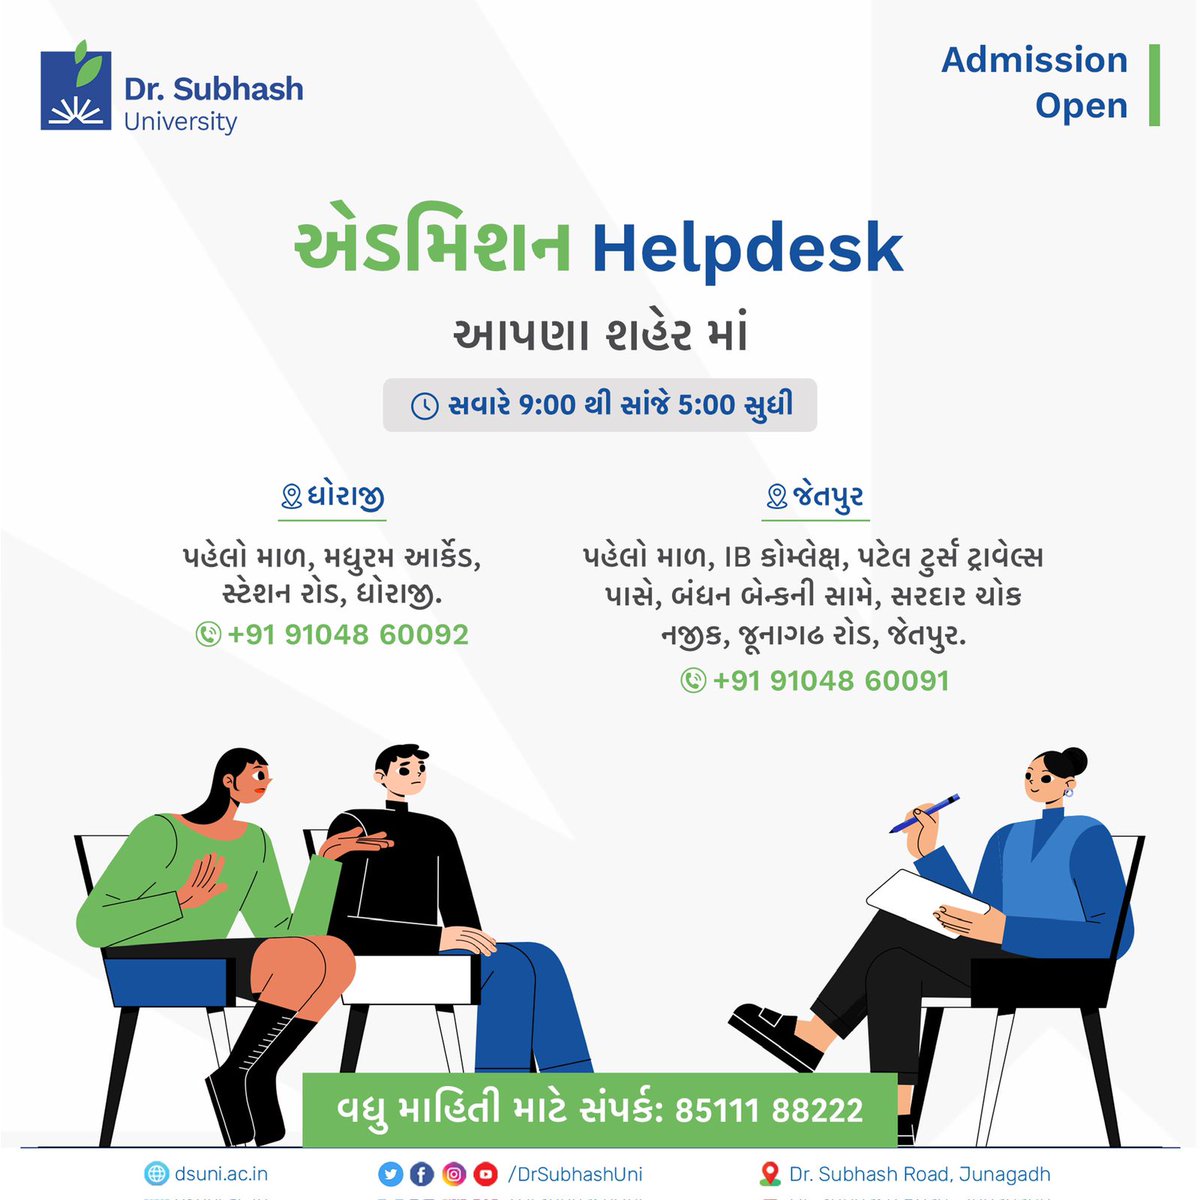 Ready to embark on your academic journeyJoin DSU! Our team at the Admission Helpdesk is here to guide you through the process. Reach out to us at our Dhoraji or Jetpur locations, or call for more information. Let's make your educational dreams a reality #DrSubhashUniversity #DSU